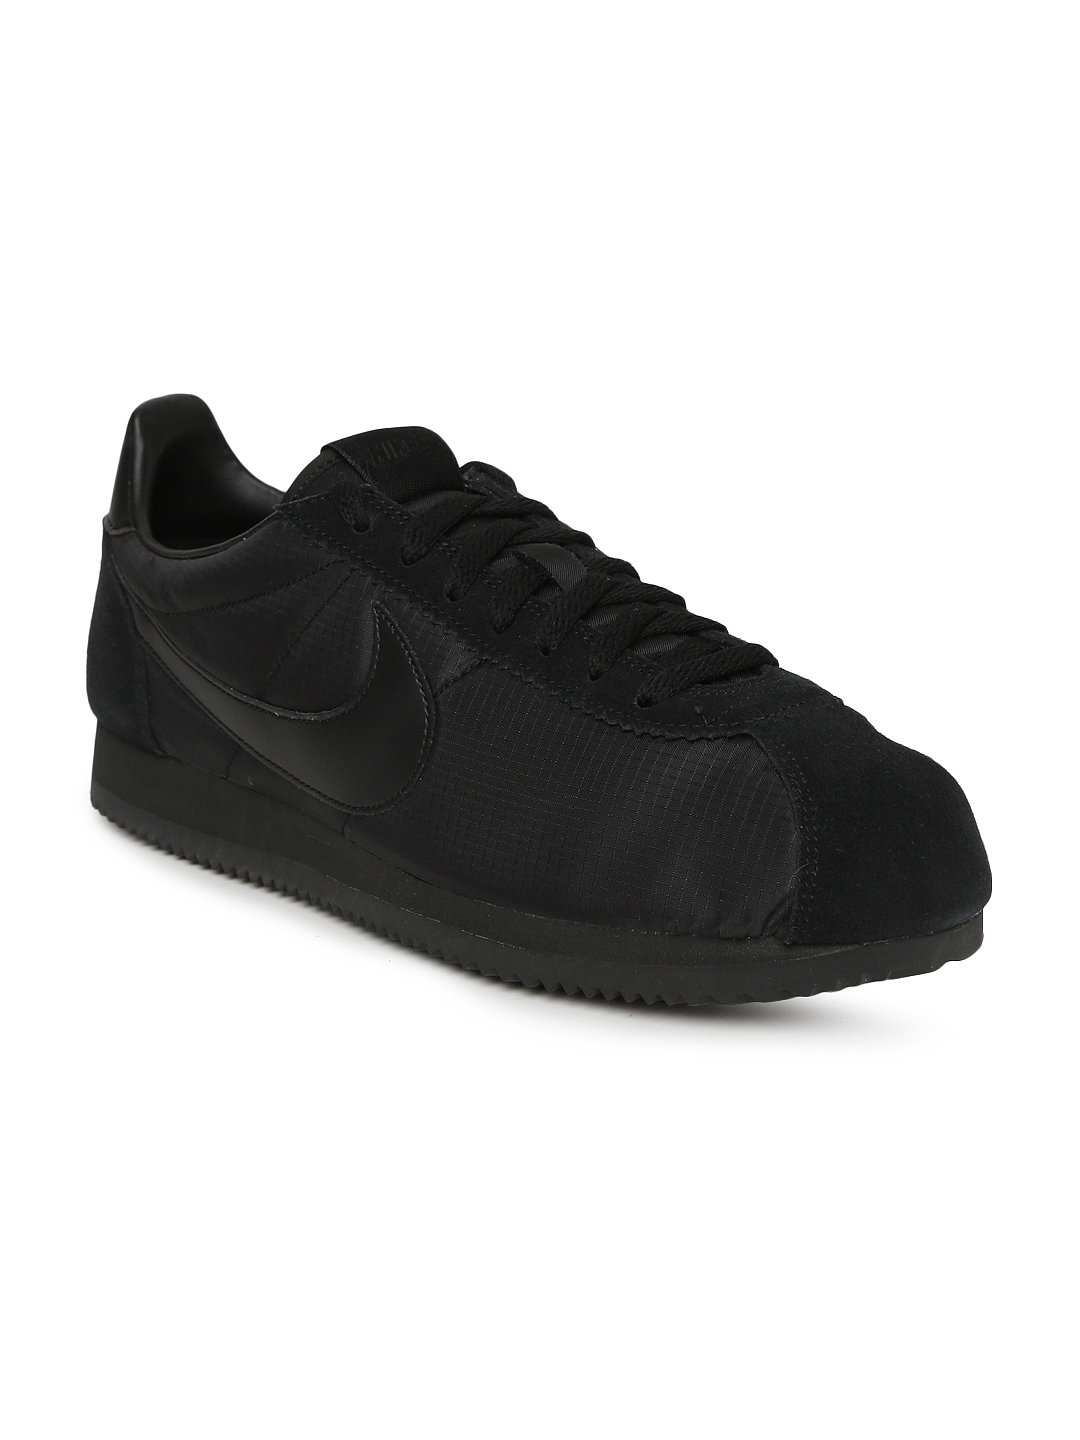 White And Black Cortez Deals Discounted, Save 64% | jlcatj.gob.mx